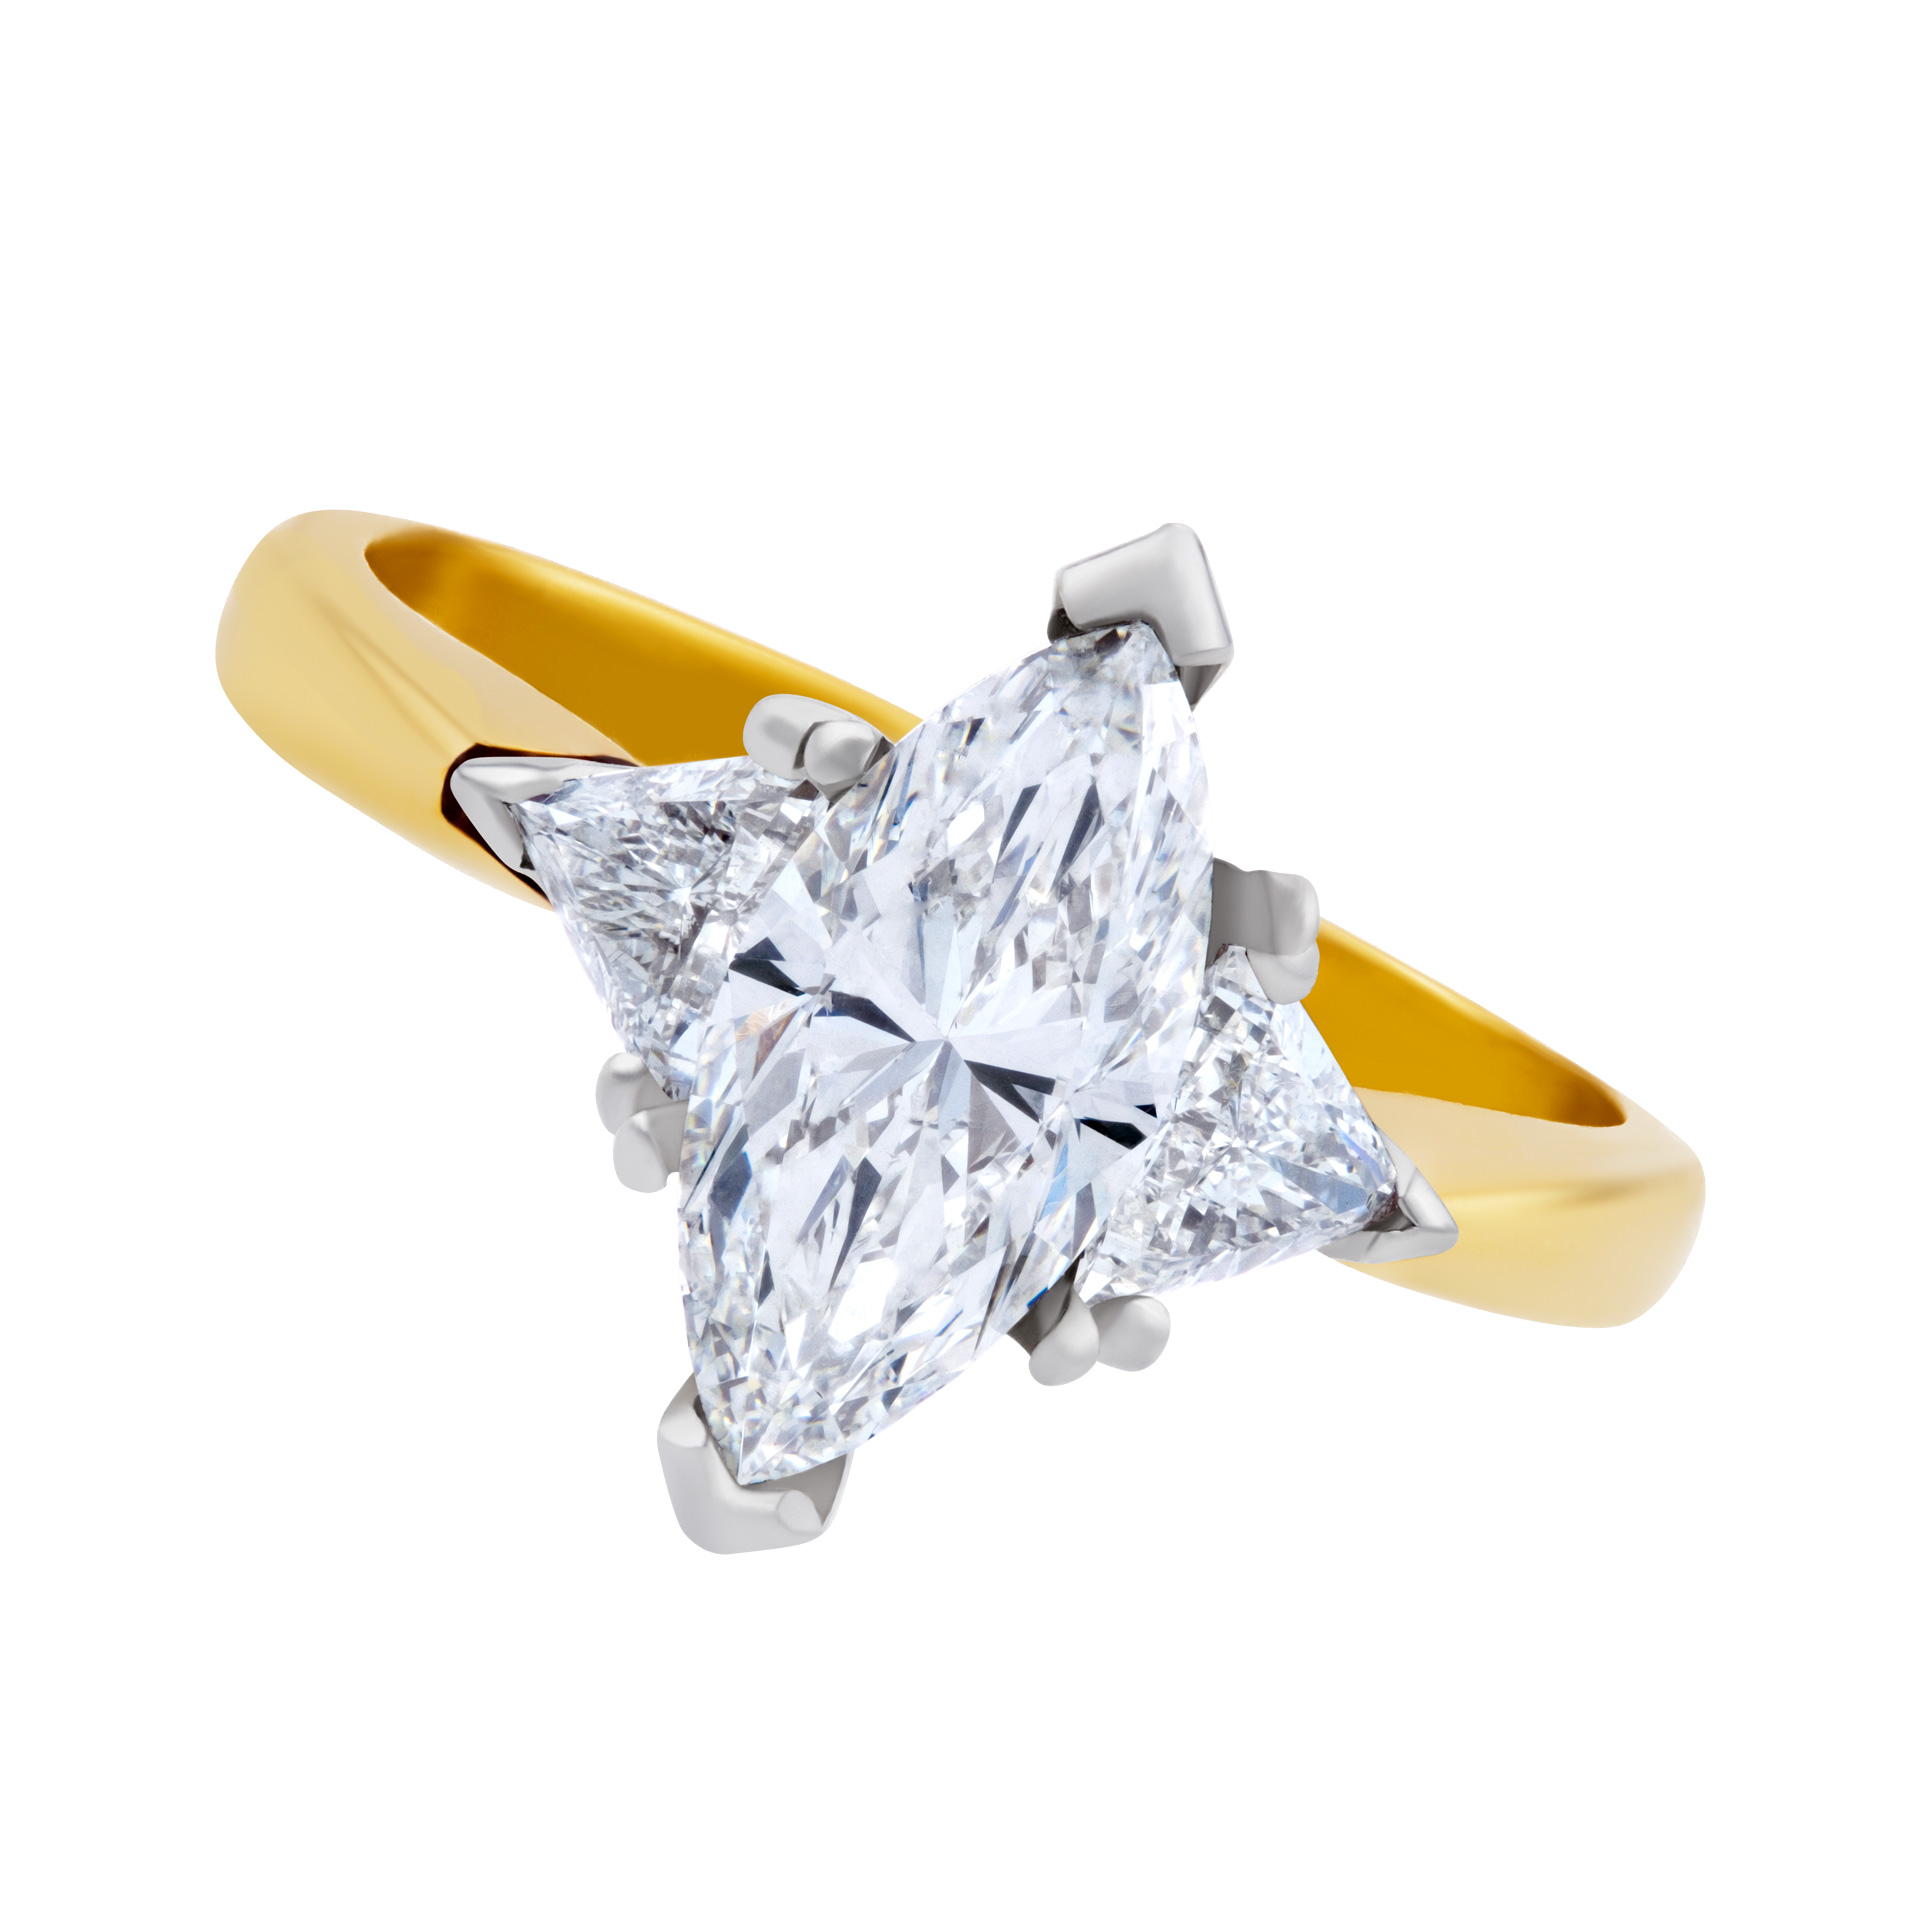 GIA Certified Diamond 1.30 cts (H color, SI2 clarity) ring set in 18k yellow gold. image 1